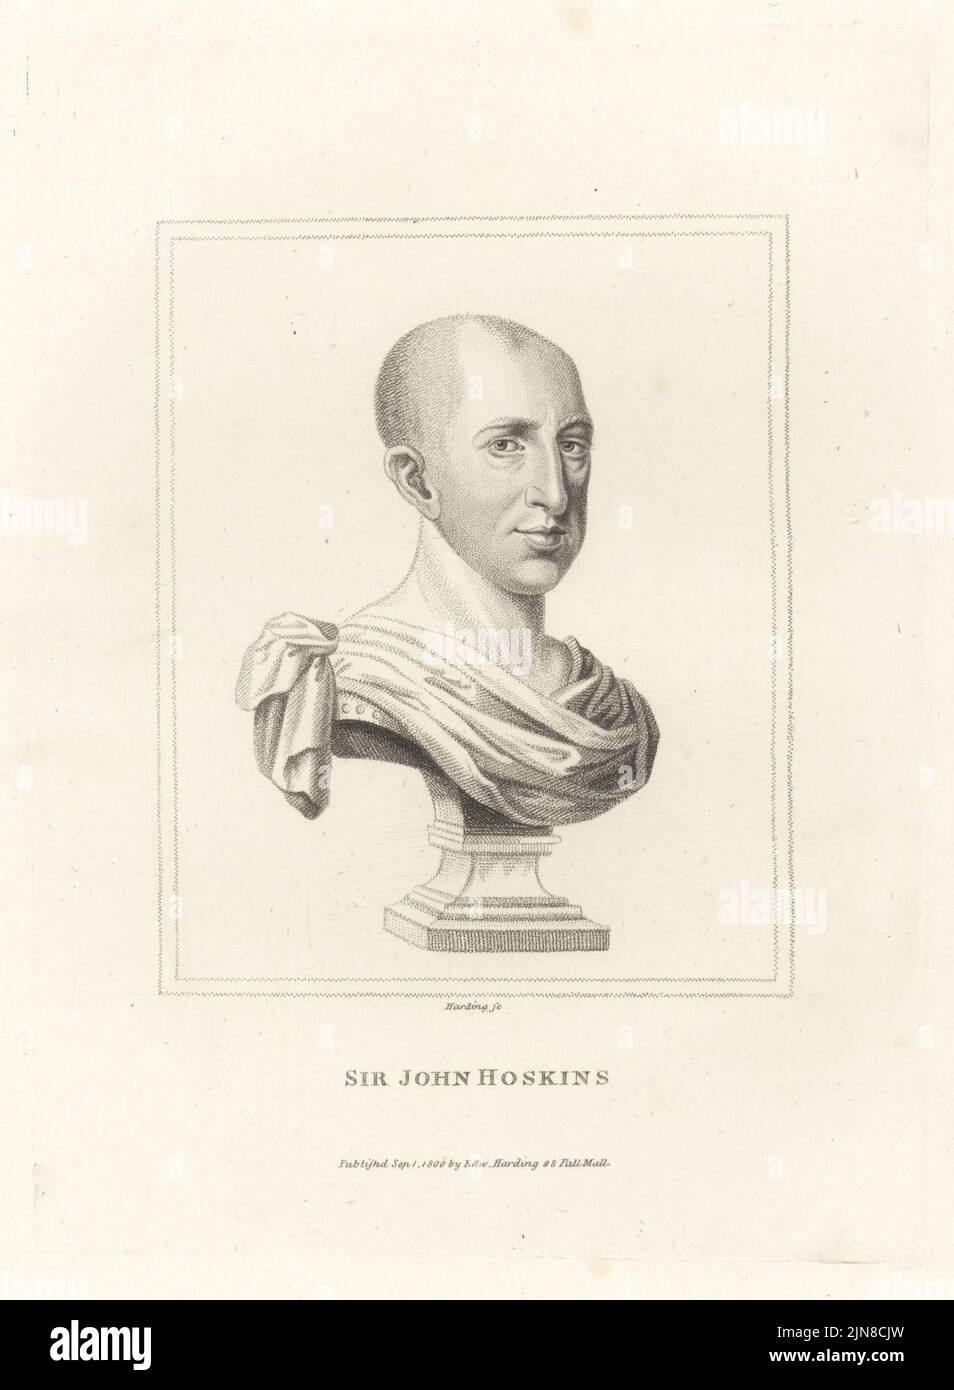 Sir John Hoskins, 2nd Baronet, English lawyer, Master in Chancery and founder and President of the Royal Society, 1634-1705. From a bust by unknown sculptor. Copperplate engraving by Edward Harding from John Adolphus’ The British Cabinet, containing Portraits of Illustrious Personages, printed by T. Bensley for E. Harding, 98 Pall Mall, London, 1800. Stock Photo